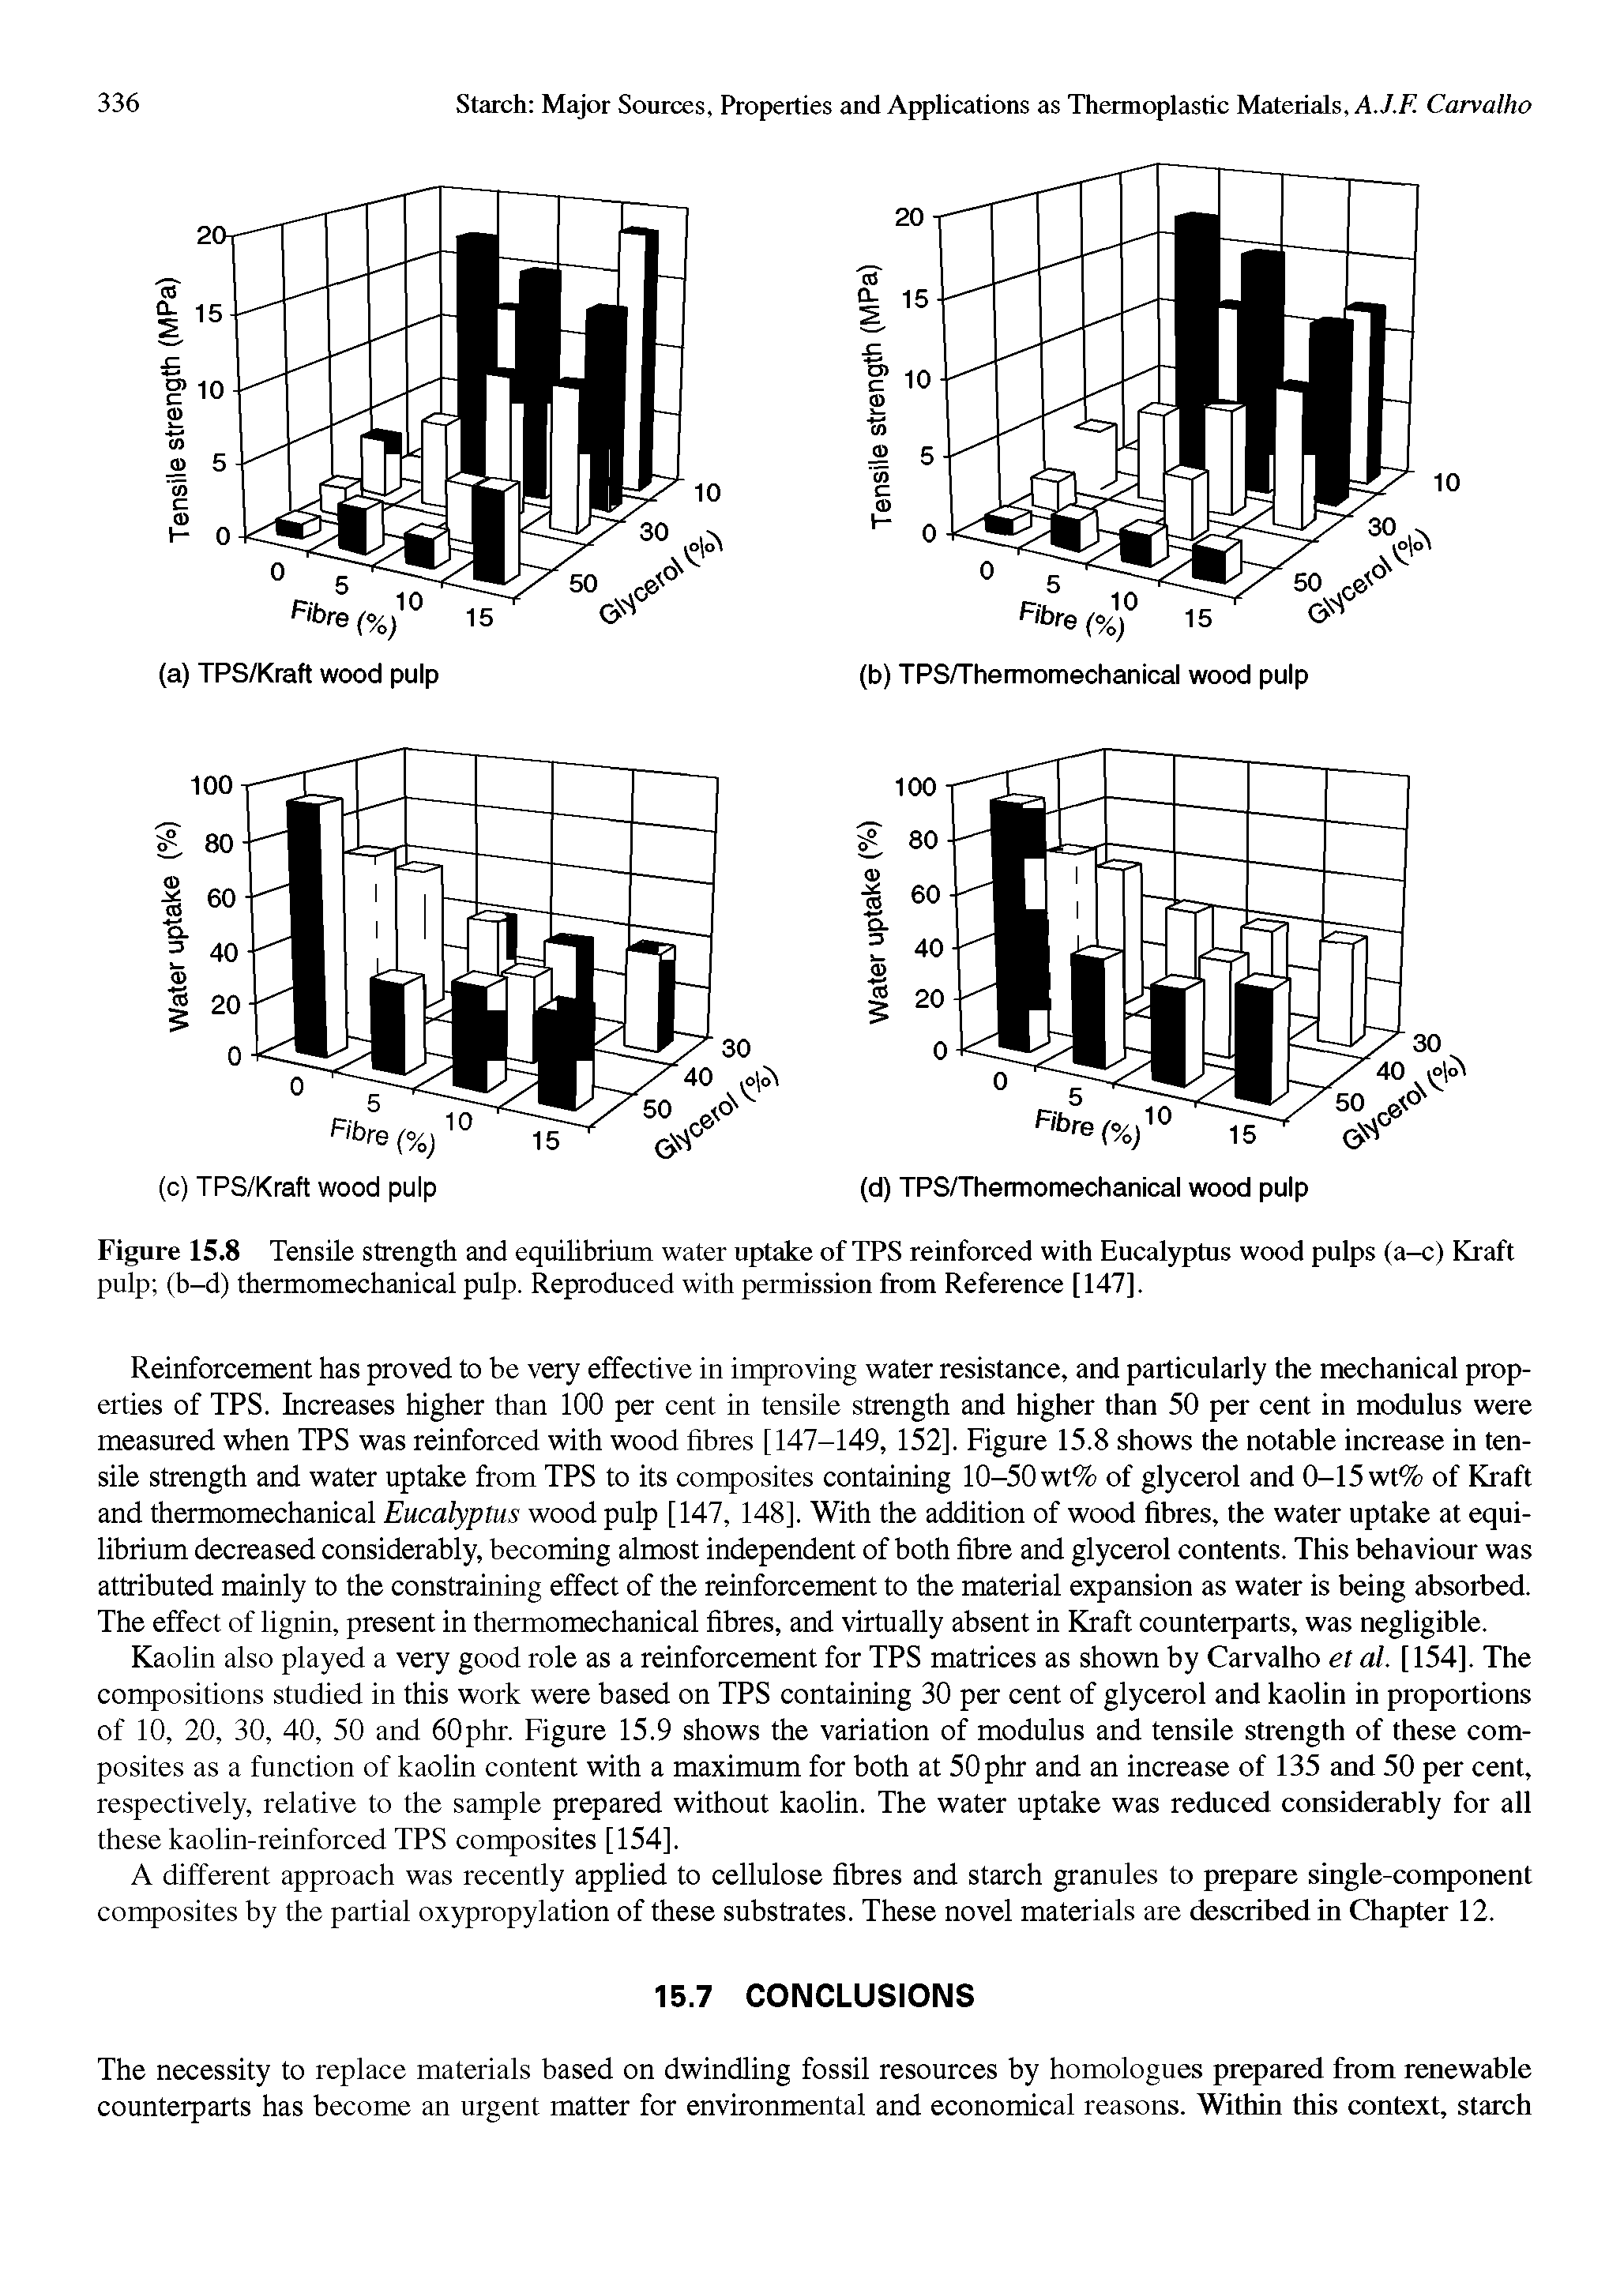 Figure 15.8 Tensile strength and equilibrium water uptake of TPS reinforced with Eucalyptus wood pulps (a-c) Kraft pulp (b-d) thermomechanical pulp. Reproduced with permission from Reference [147].